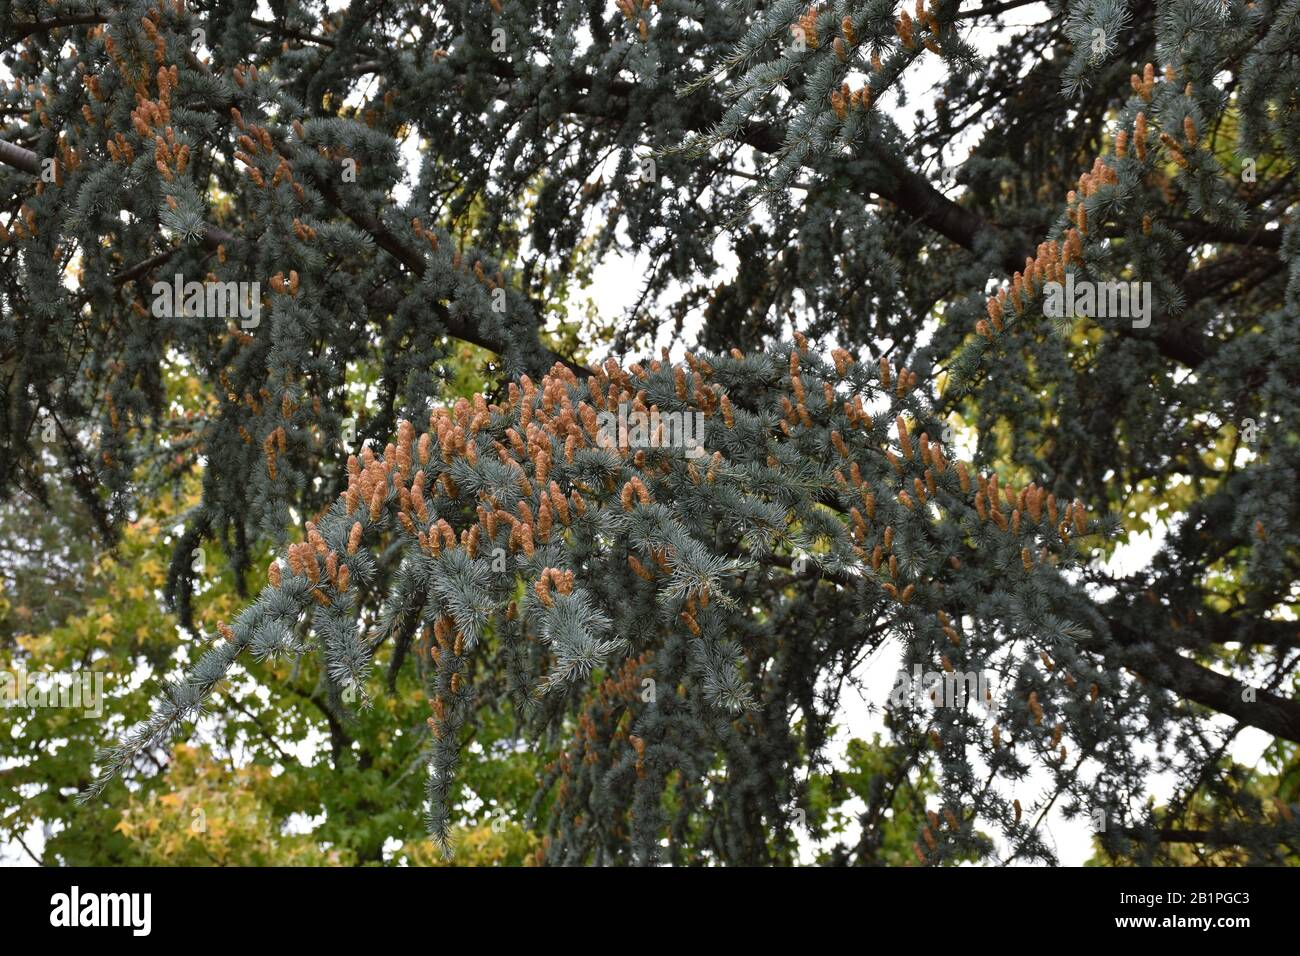 Plenty of cones on the branches of an evergreen tree Stock Photo